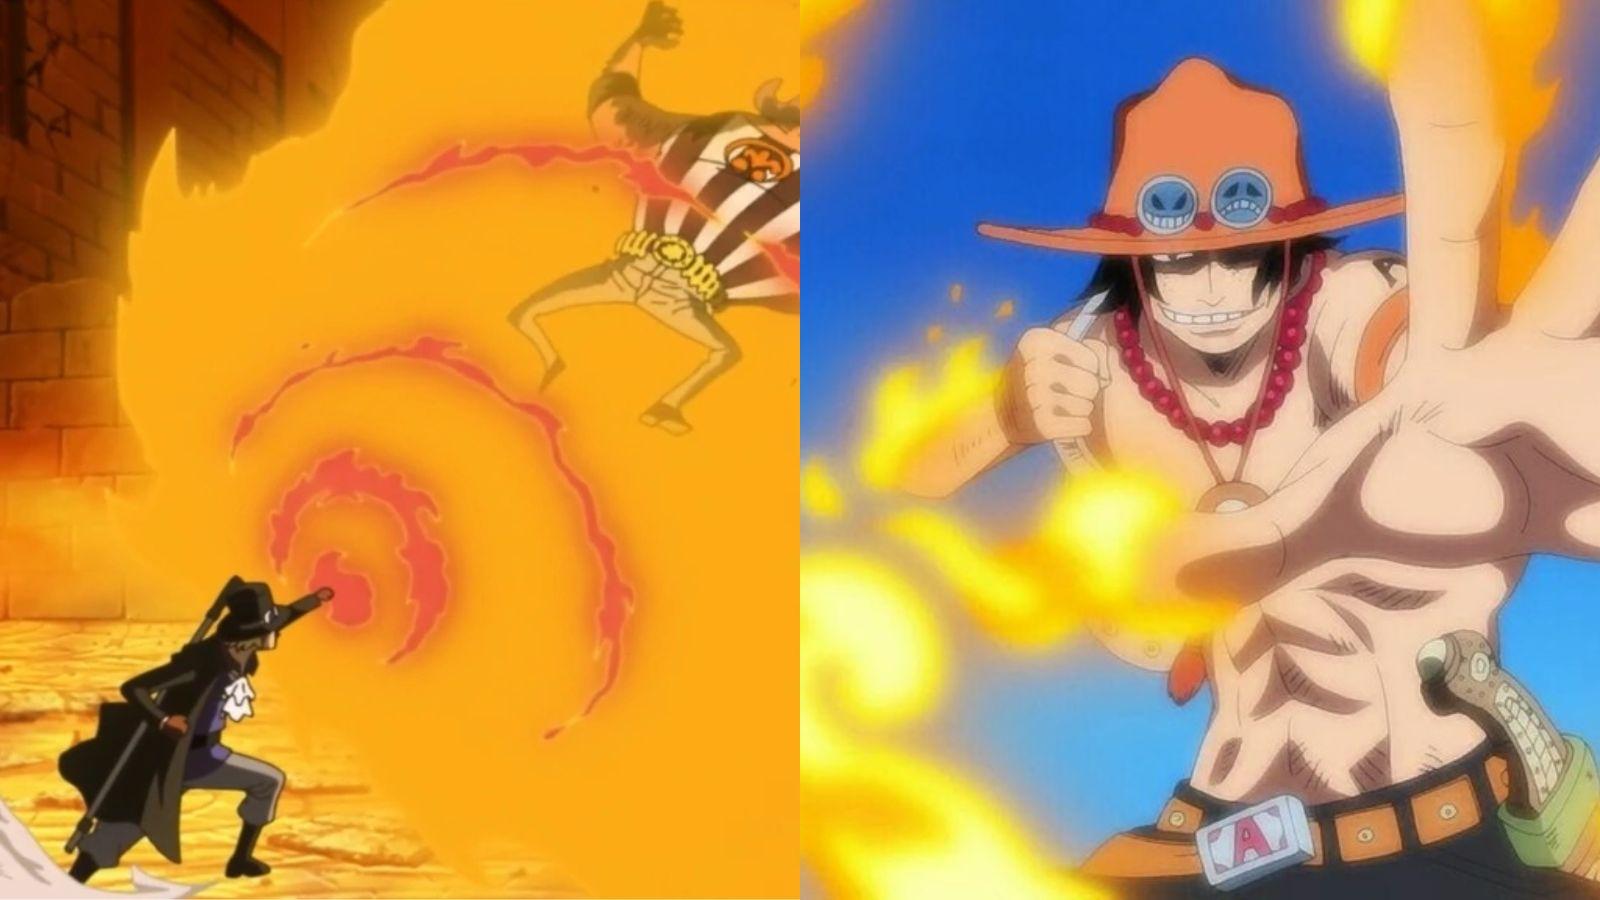 My top 21 strongest characters in one piece stampede